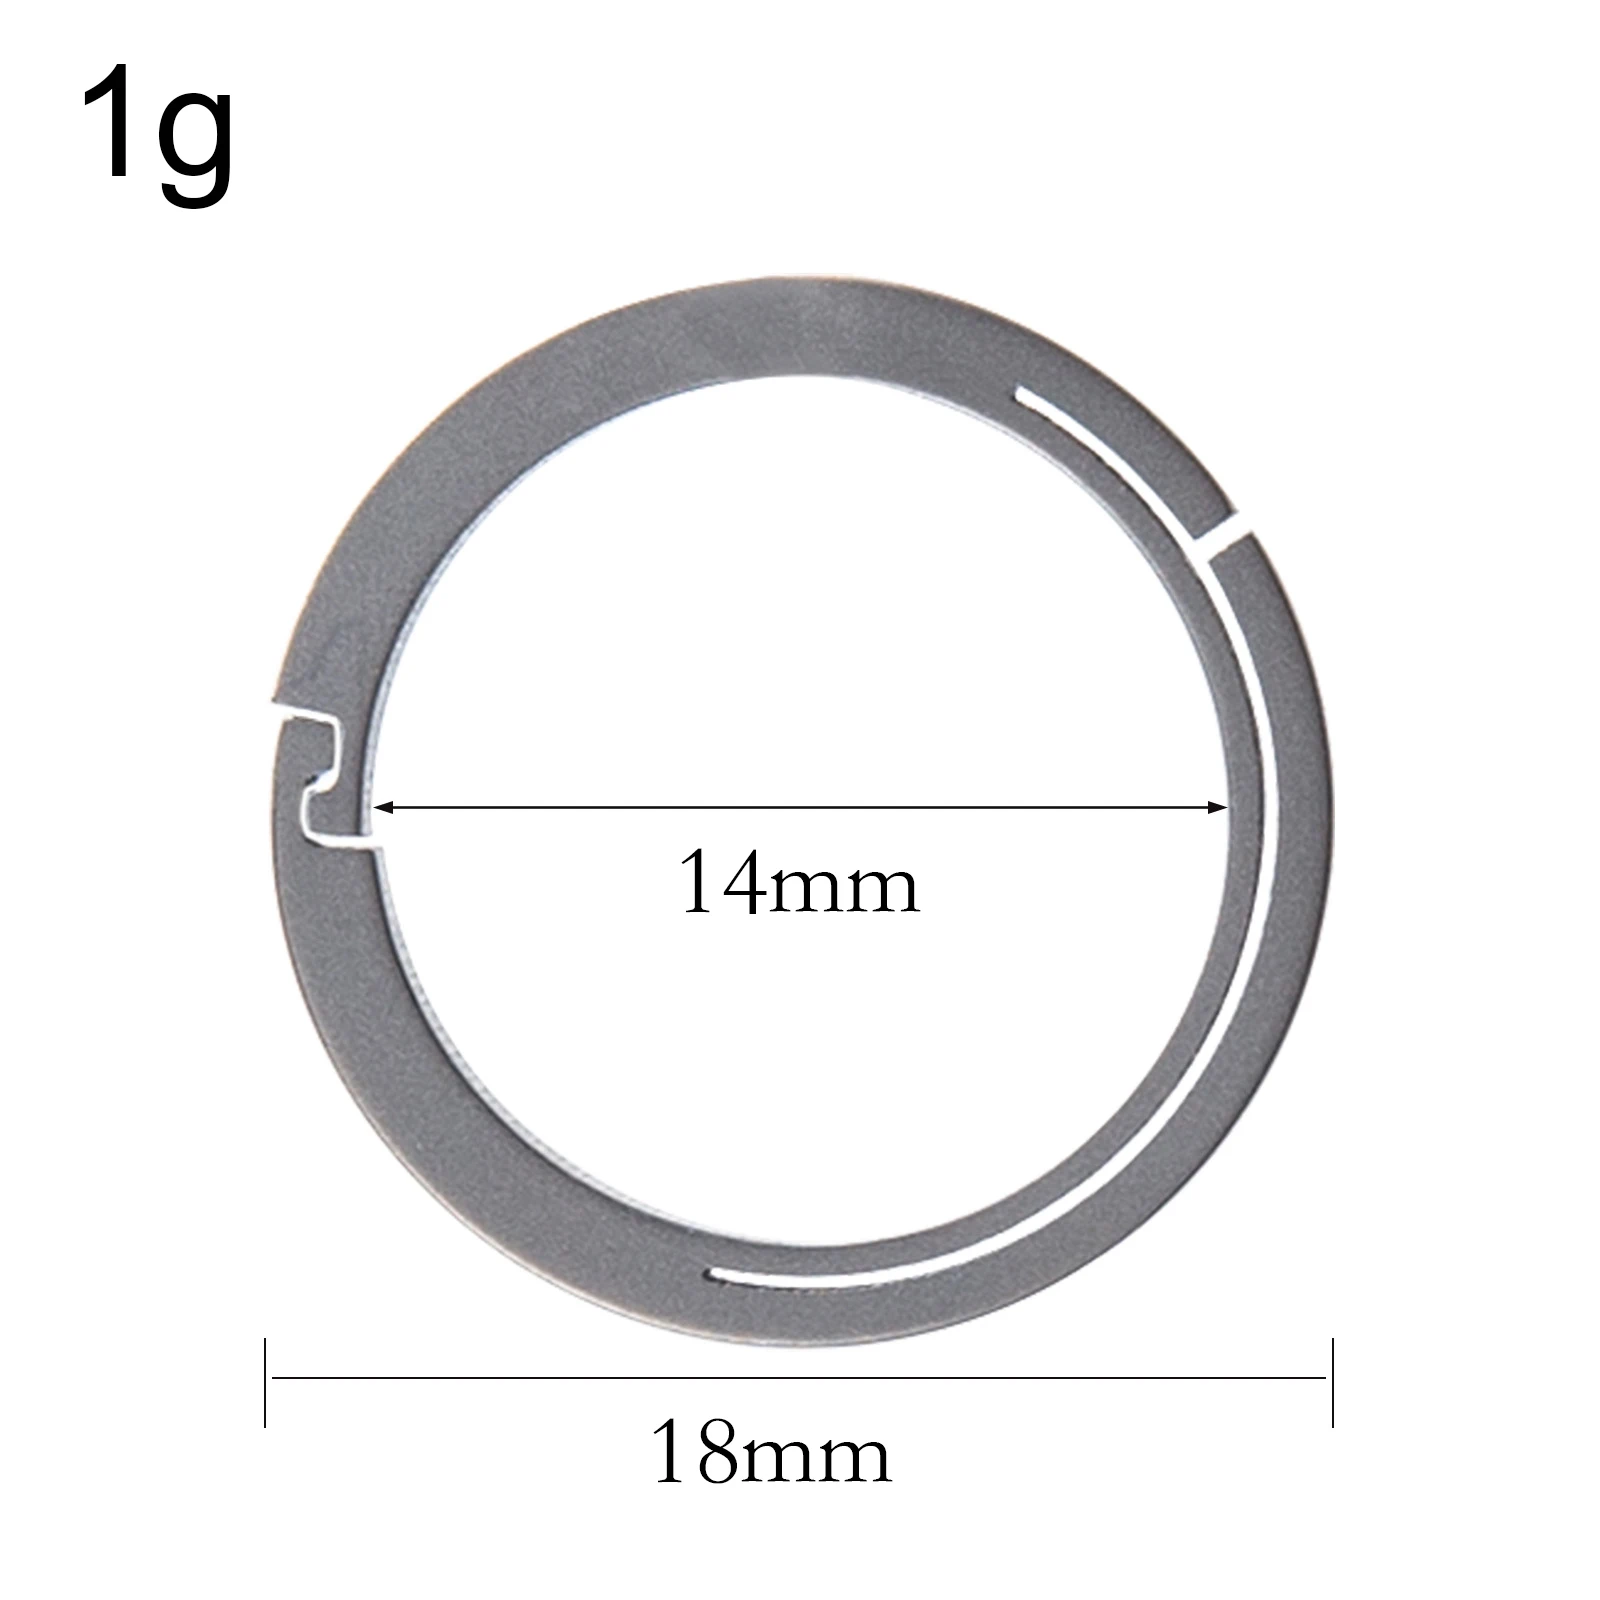 

1pc Titanium Alloy Key Rings For Keychains Quick Release Side Pushing Key Ring Wheel Organizer Keyring 18mm-32mm Outdoor Tool